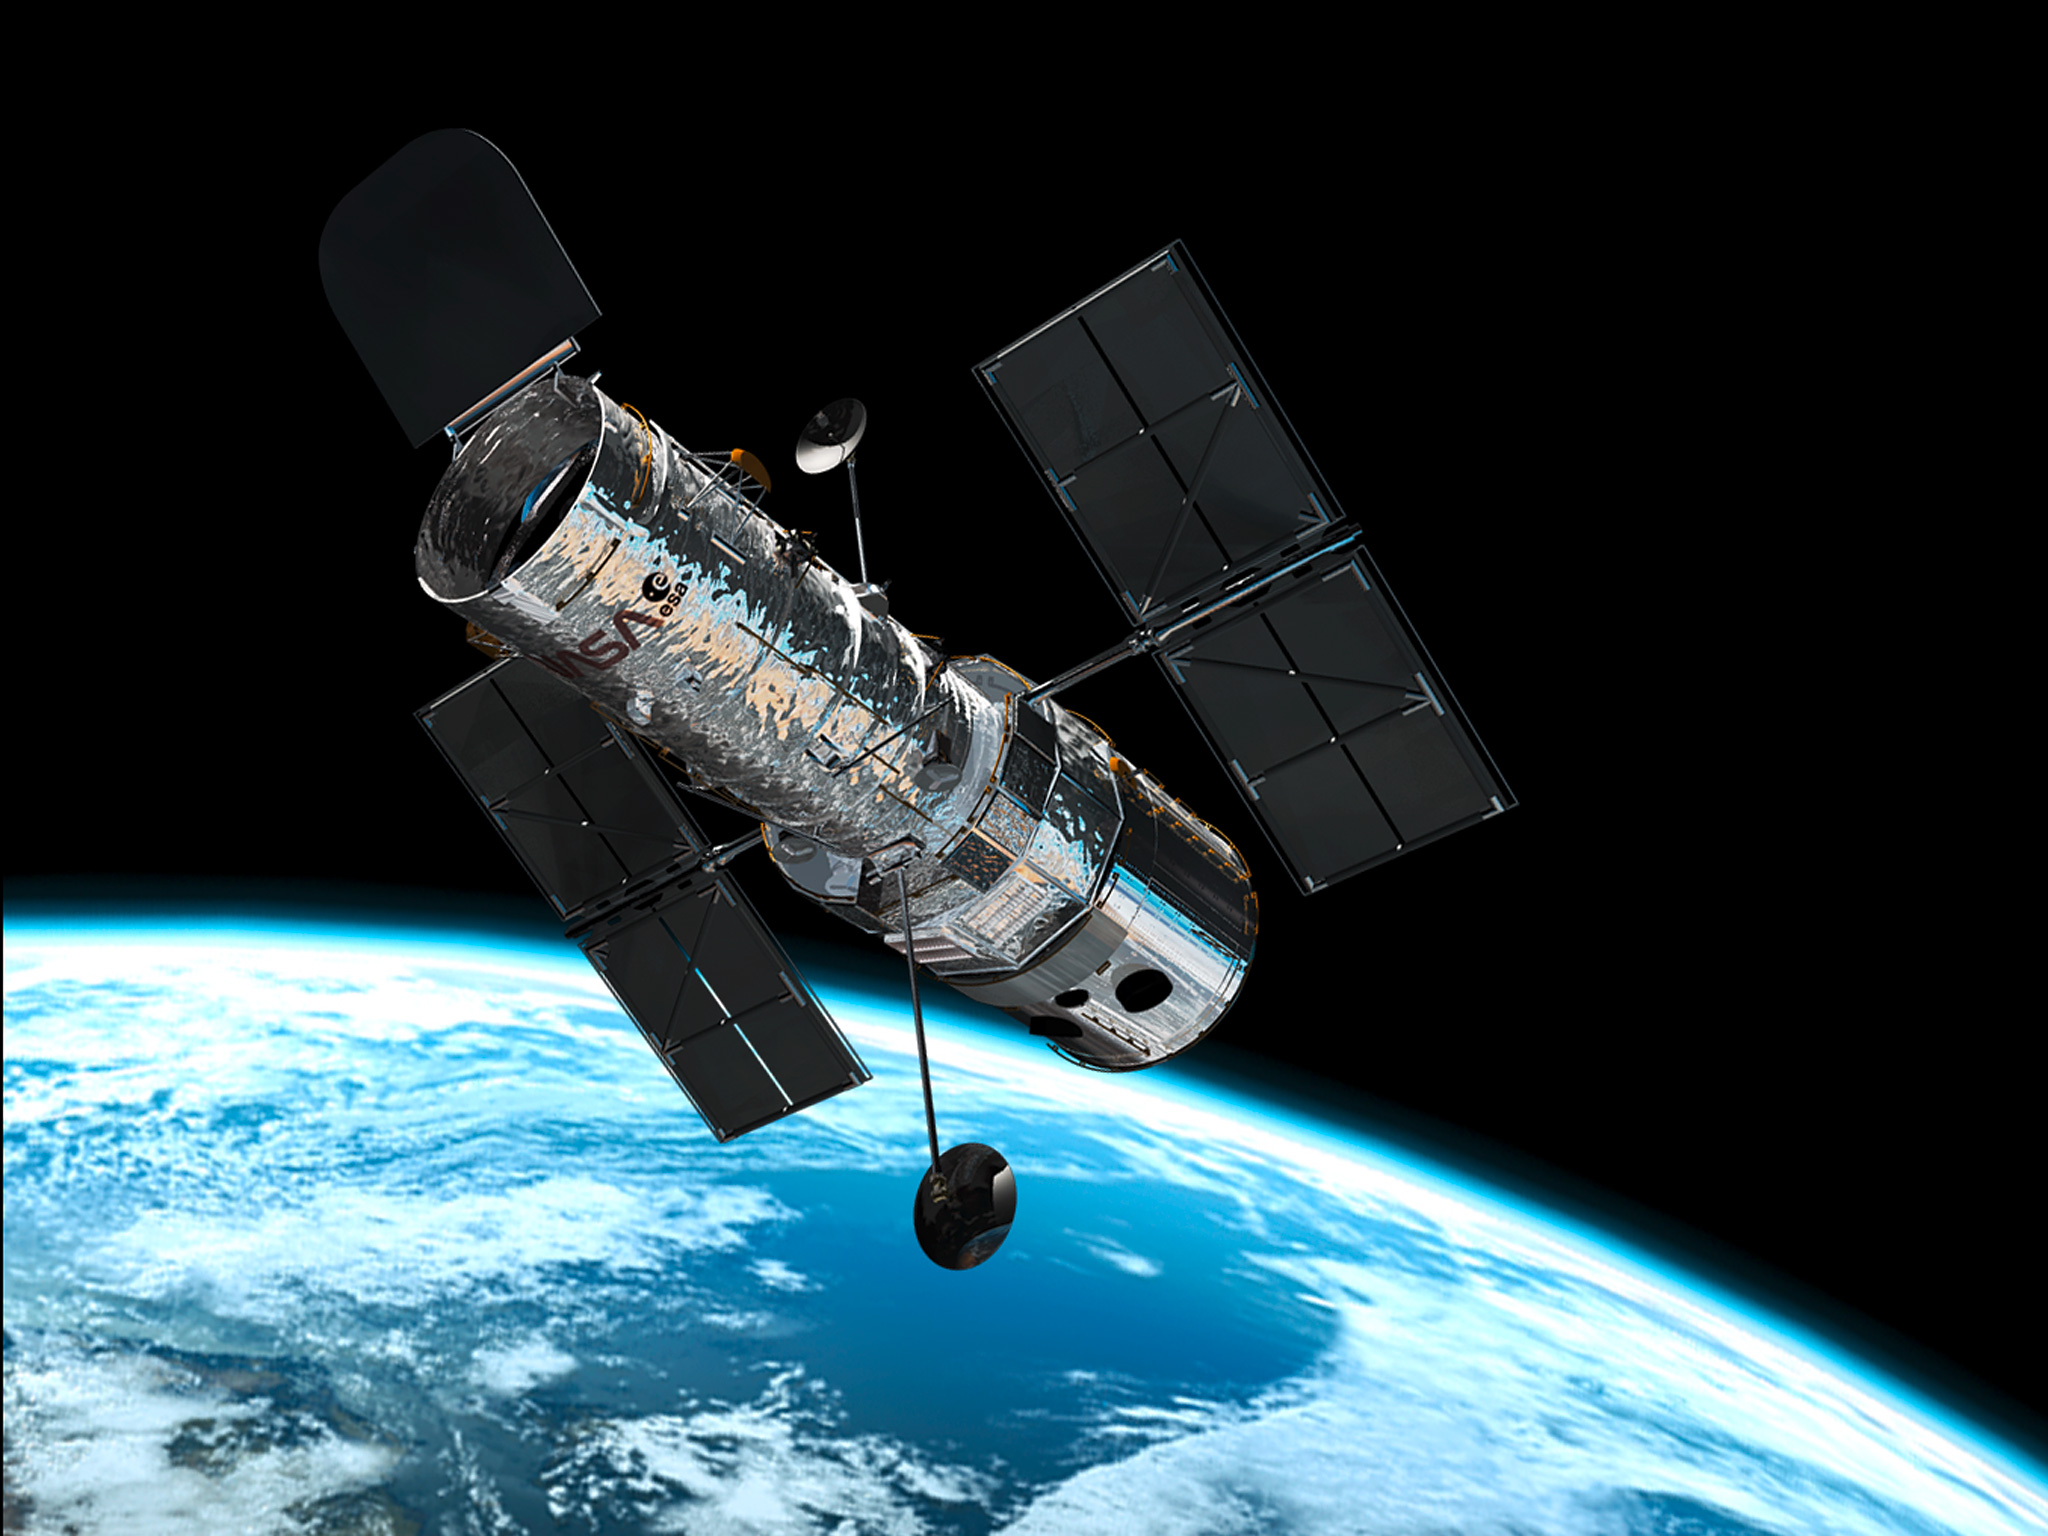 Gathering Light: 25 Years of Discovery from the Hubble Space Telescope